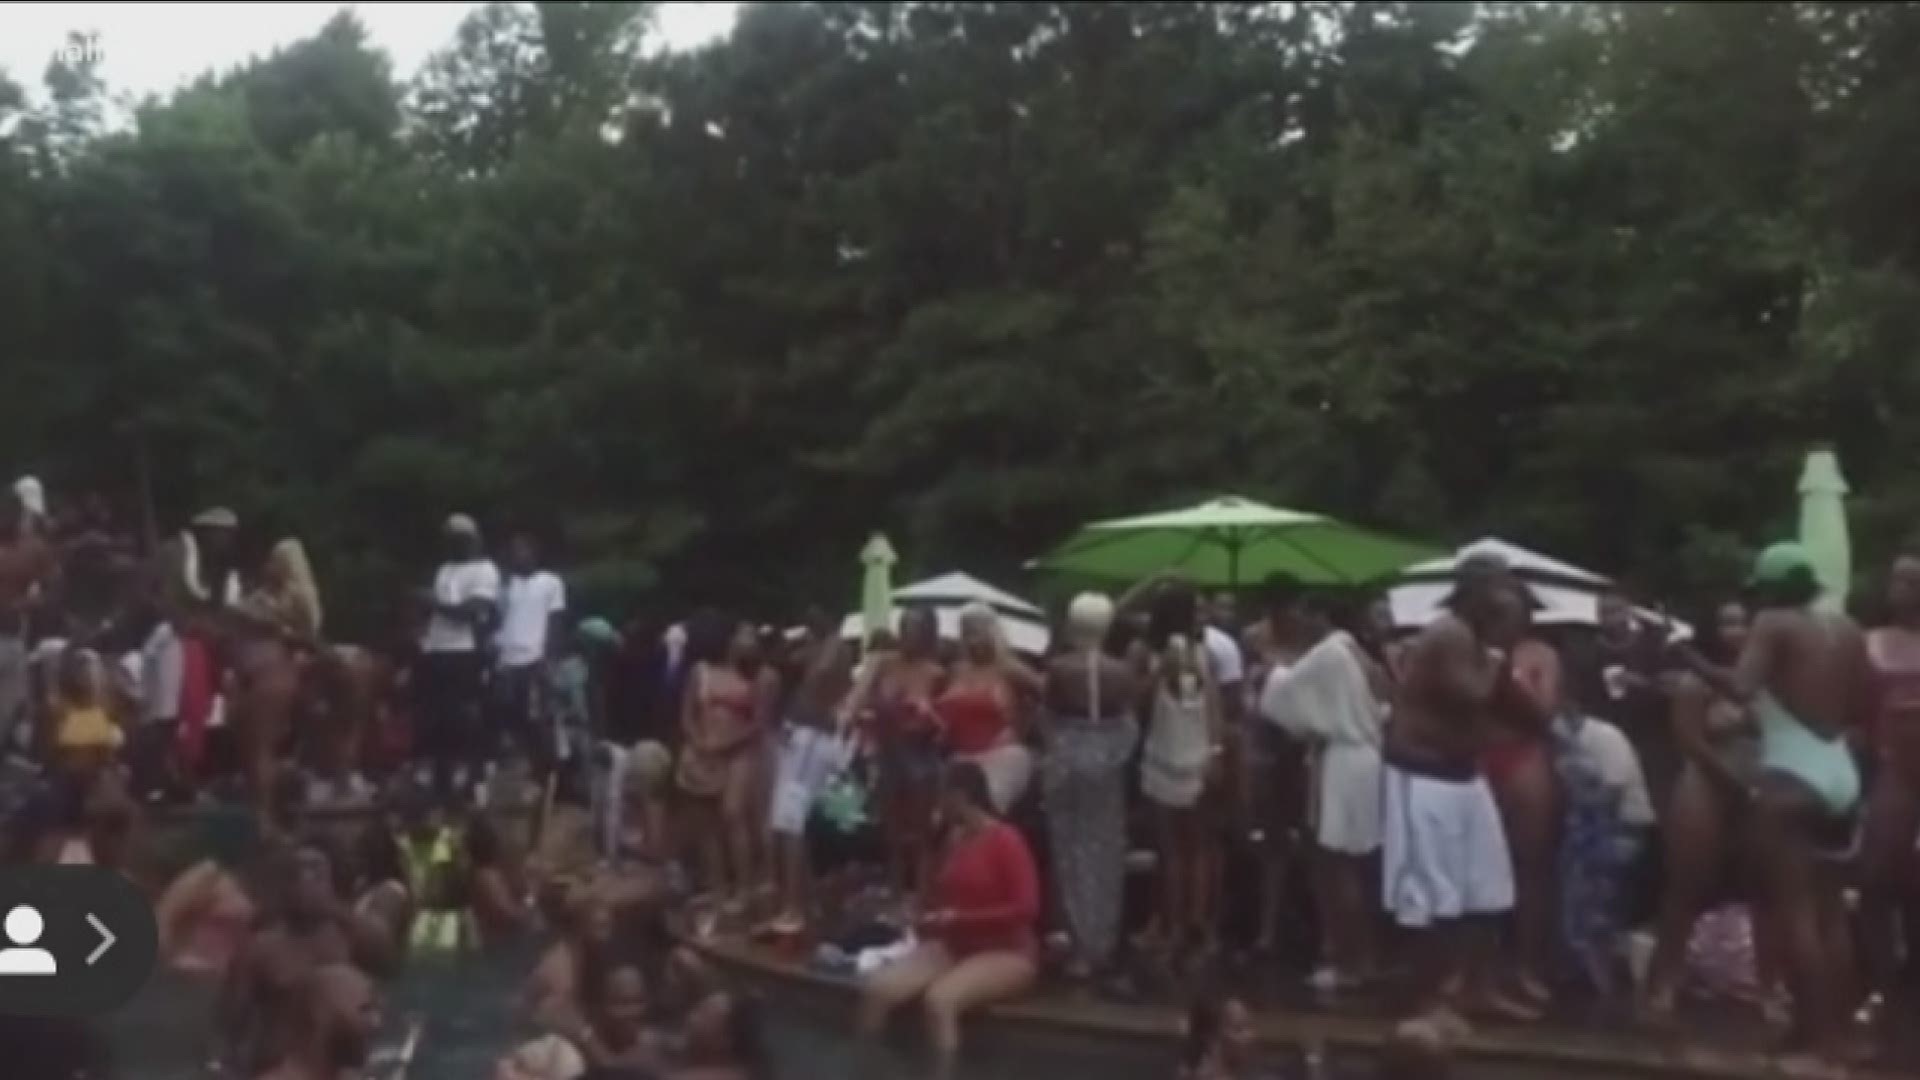 A massive house party in Snellville has neighbors furious as they try and figure out how they county let this happen.